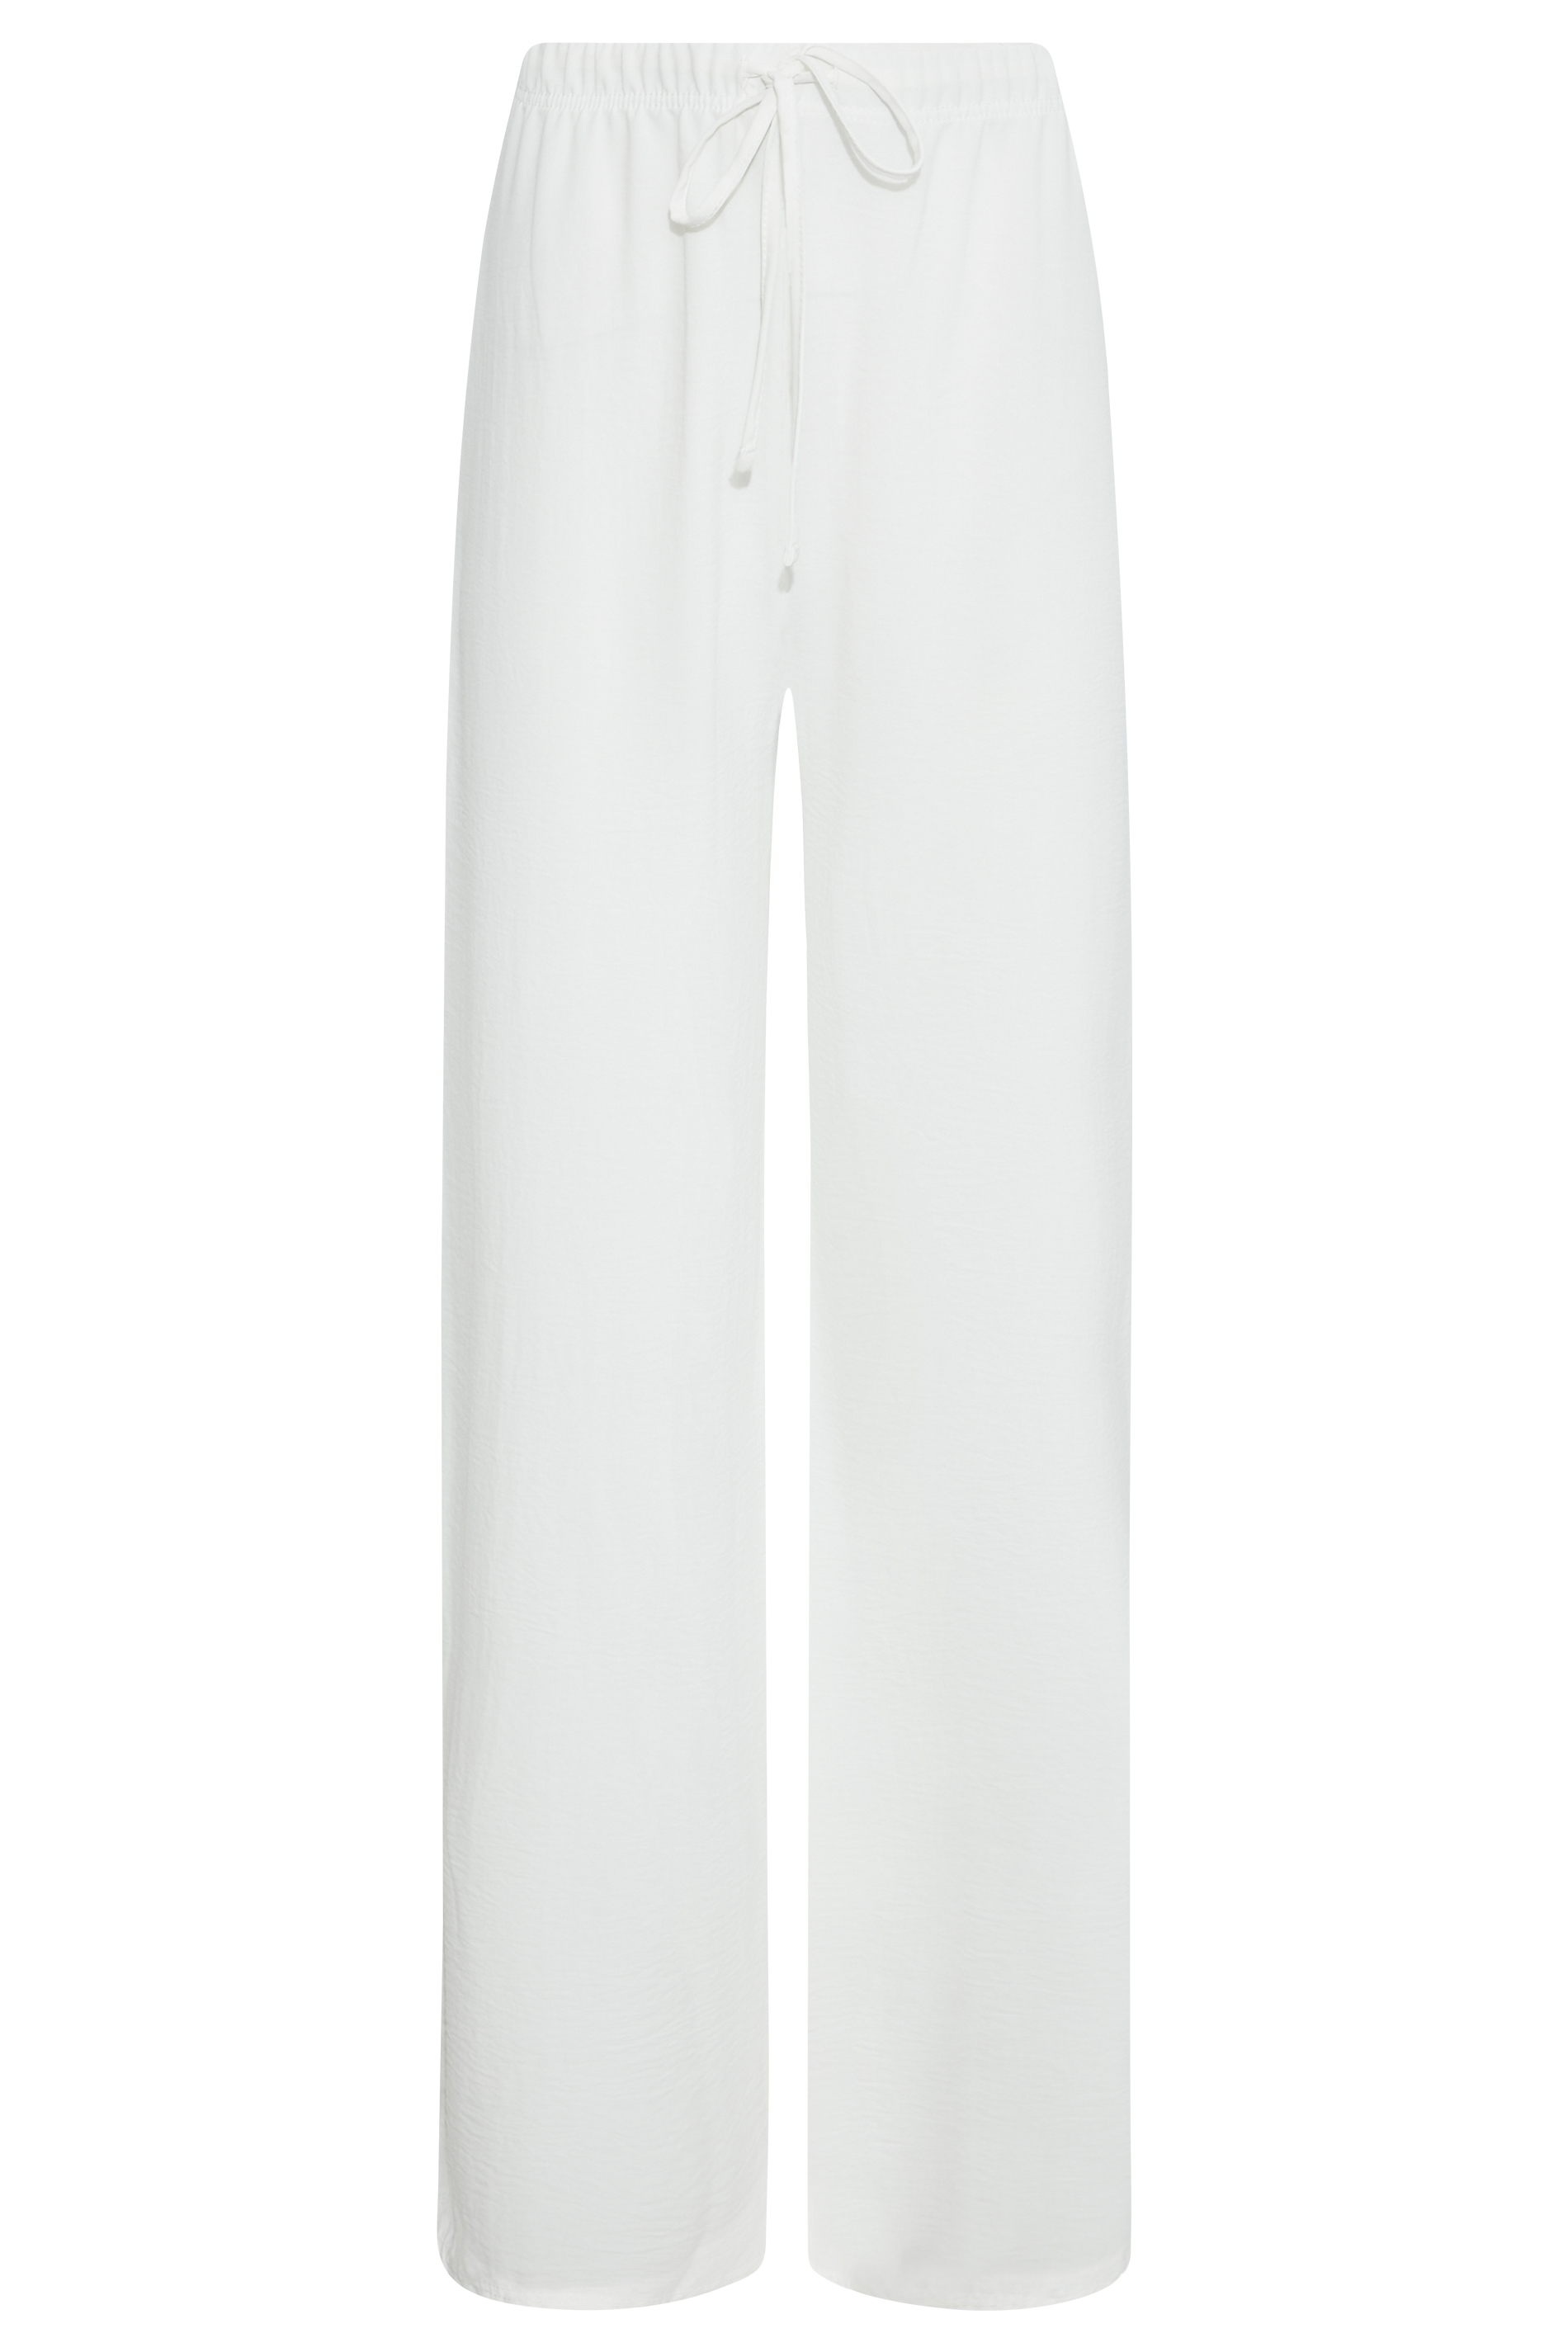 LTS Tall Women's White Crepe Wide Leg Trousers | Long Tall Sally